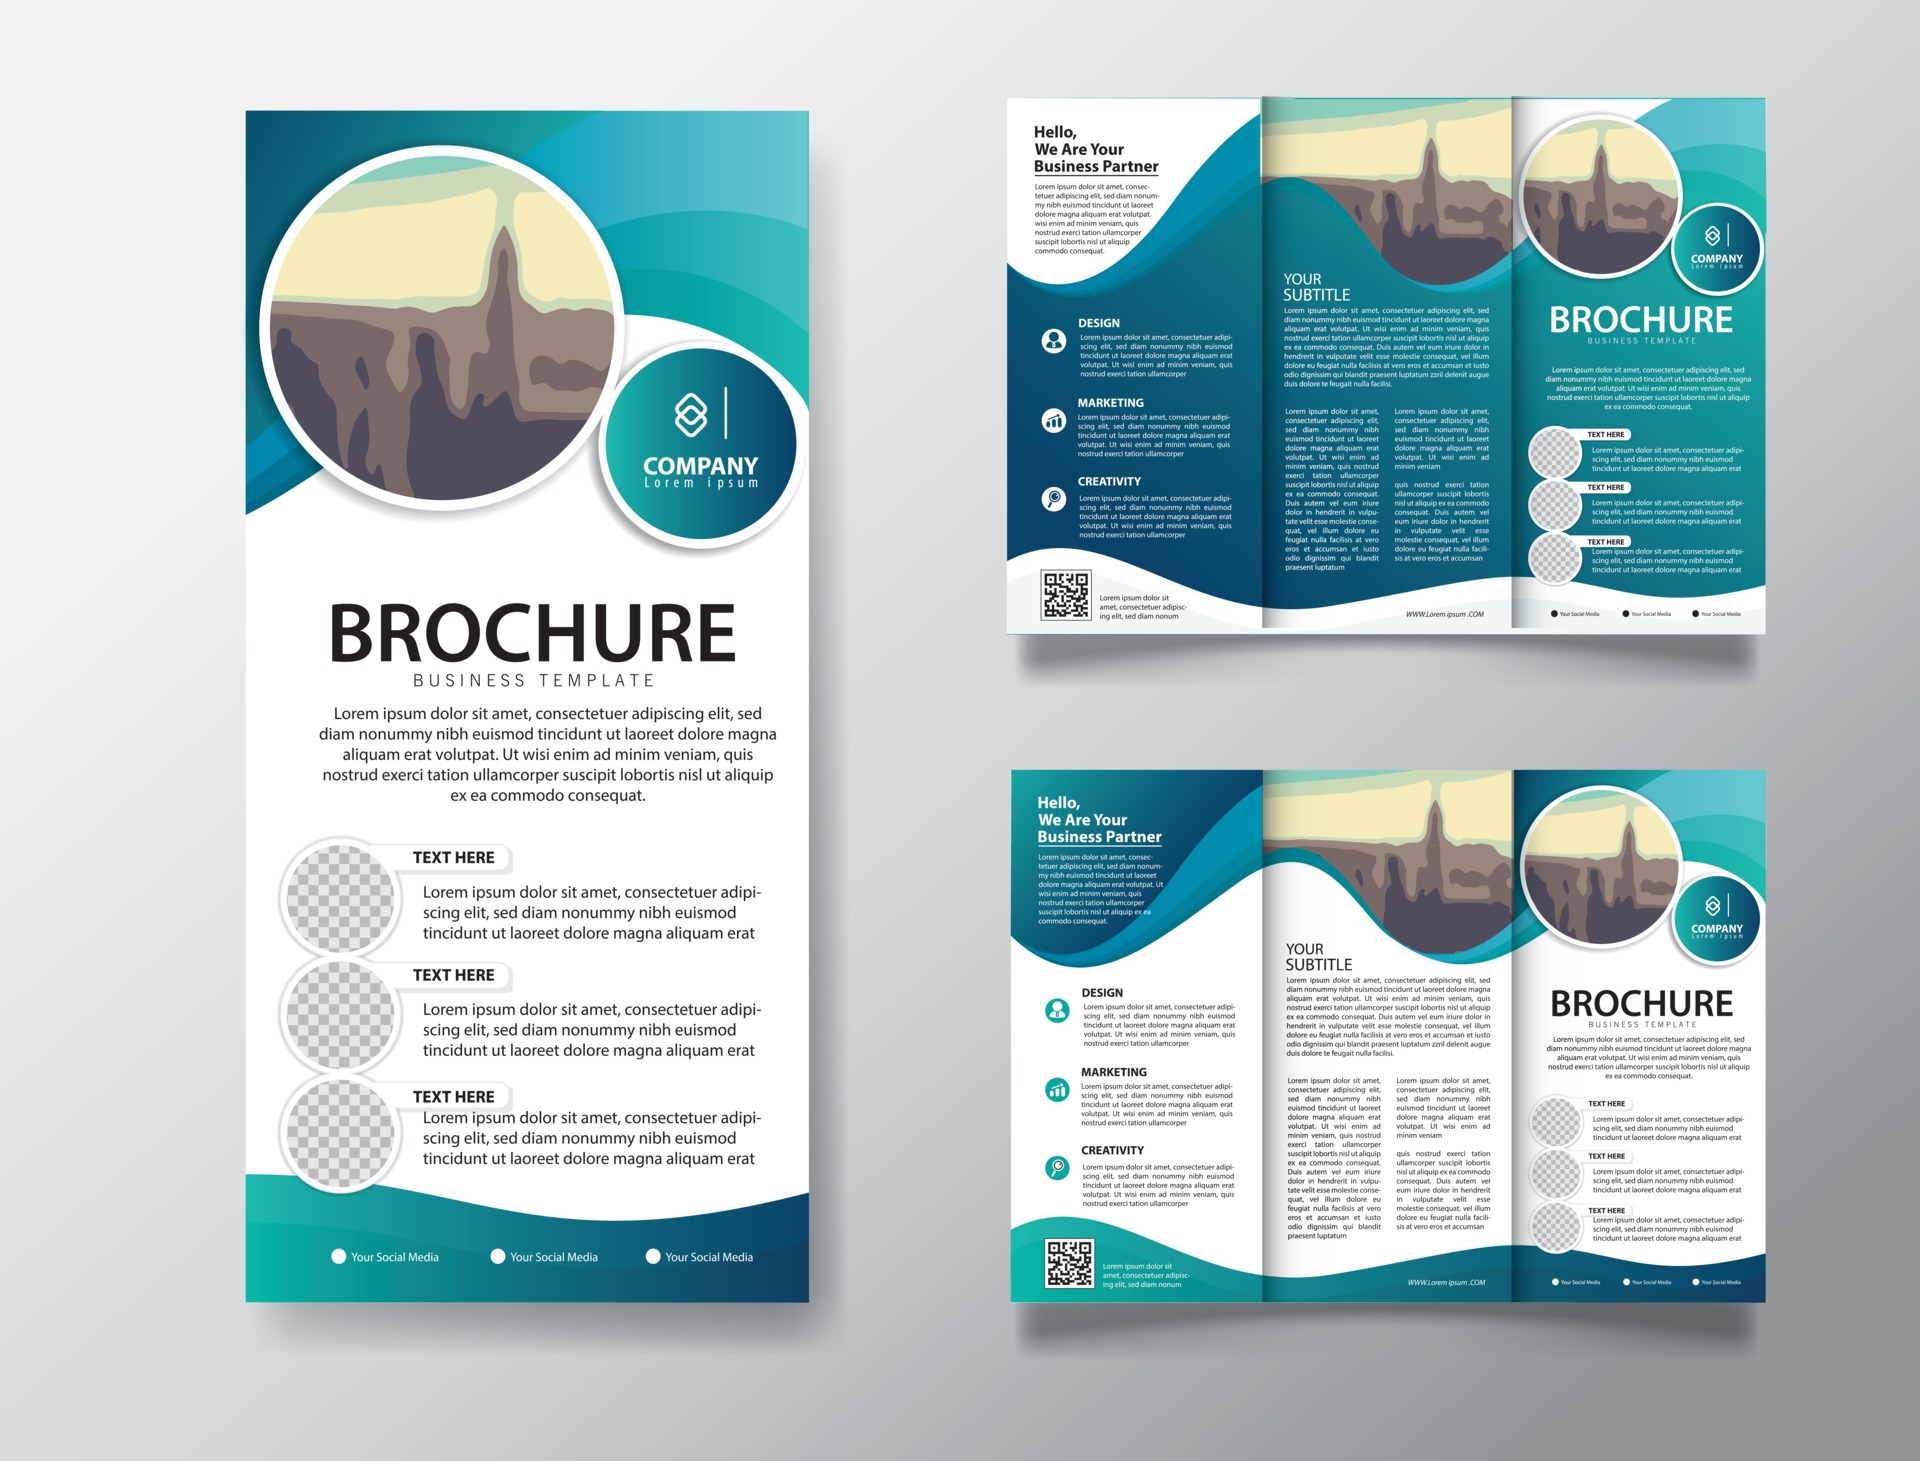 Brochure Vector Art, Icons, and Graphics for Free Download Throughout Creative Brochure Templates Free Download